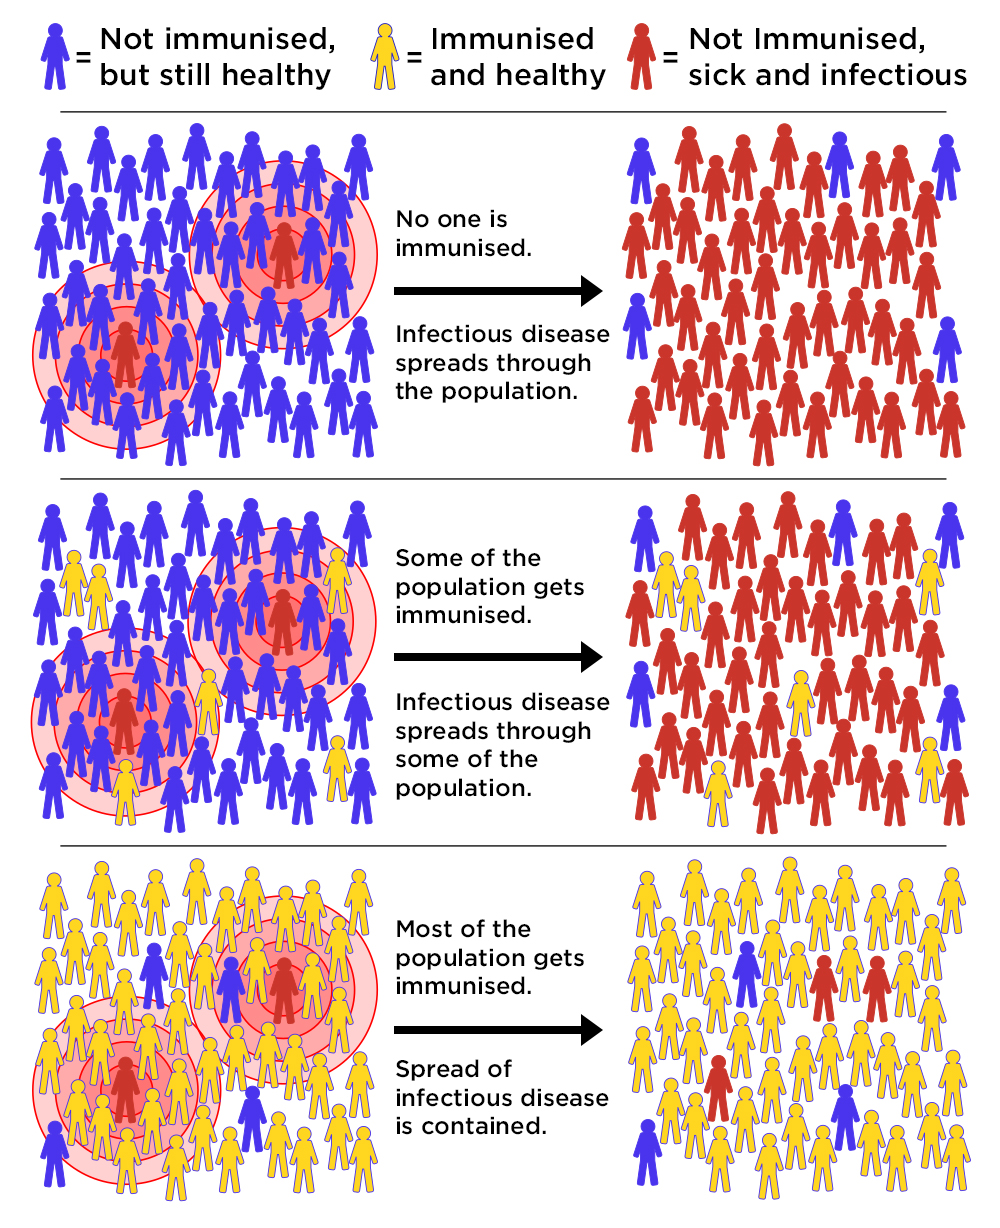 Illustration of the concept of herd immunity